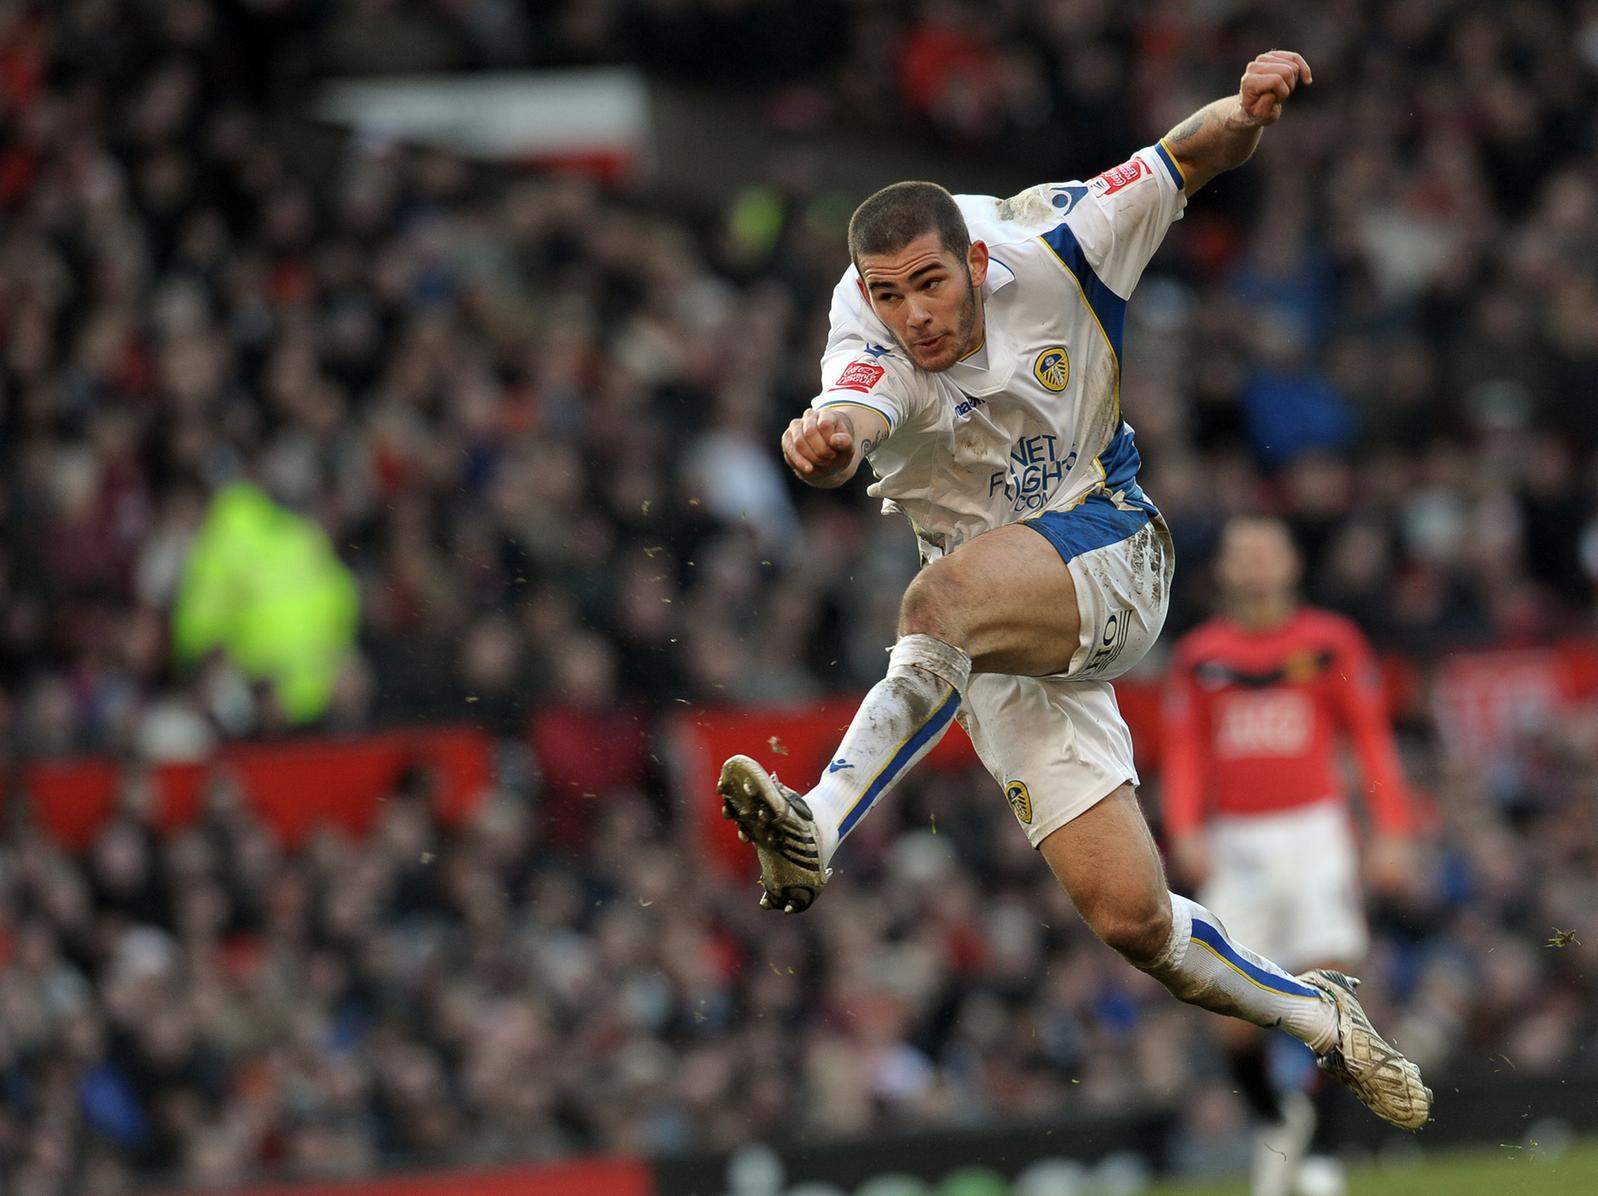 His stamina was a major asset and the biggest threat to Leeds in the closing stages was the possibility that the United players hard work would take its toll. Covered a massive amount of ground. 8/10